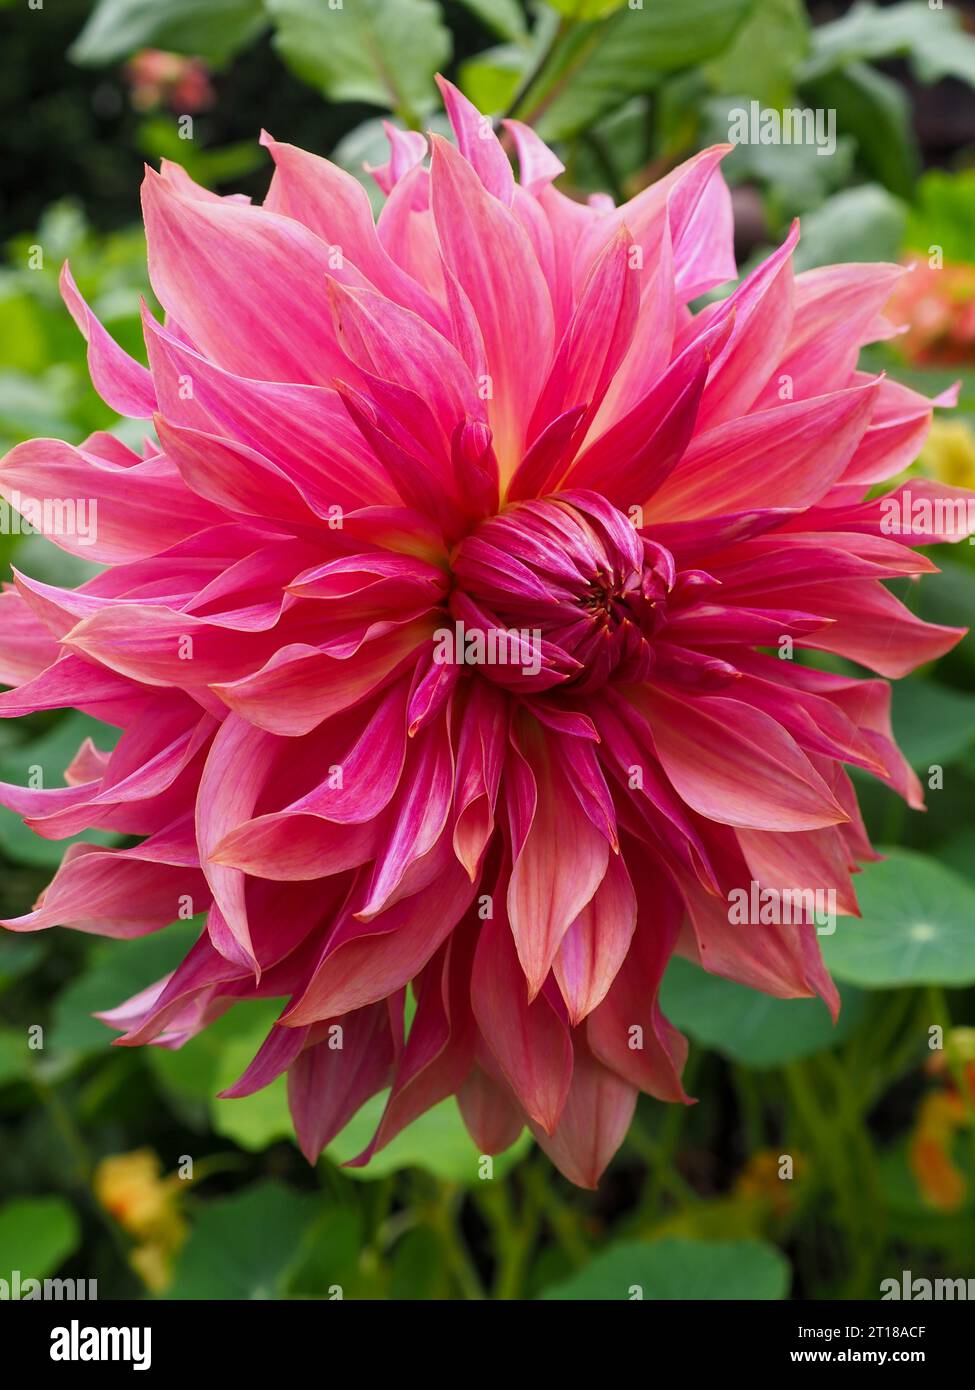 Full close up of the decorative dinnerplate Dahlia 'Penhill Dark Monarch' showing its bi-coloured pink and orange ruffled petals in an autumn garden Stock Photo